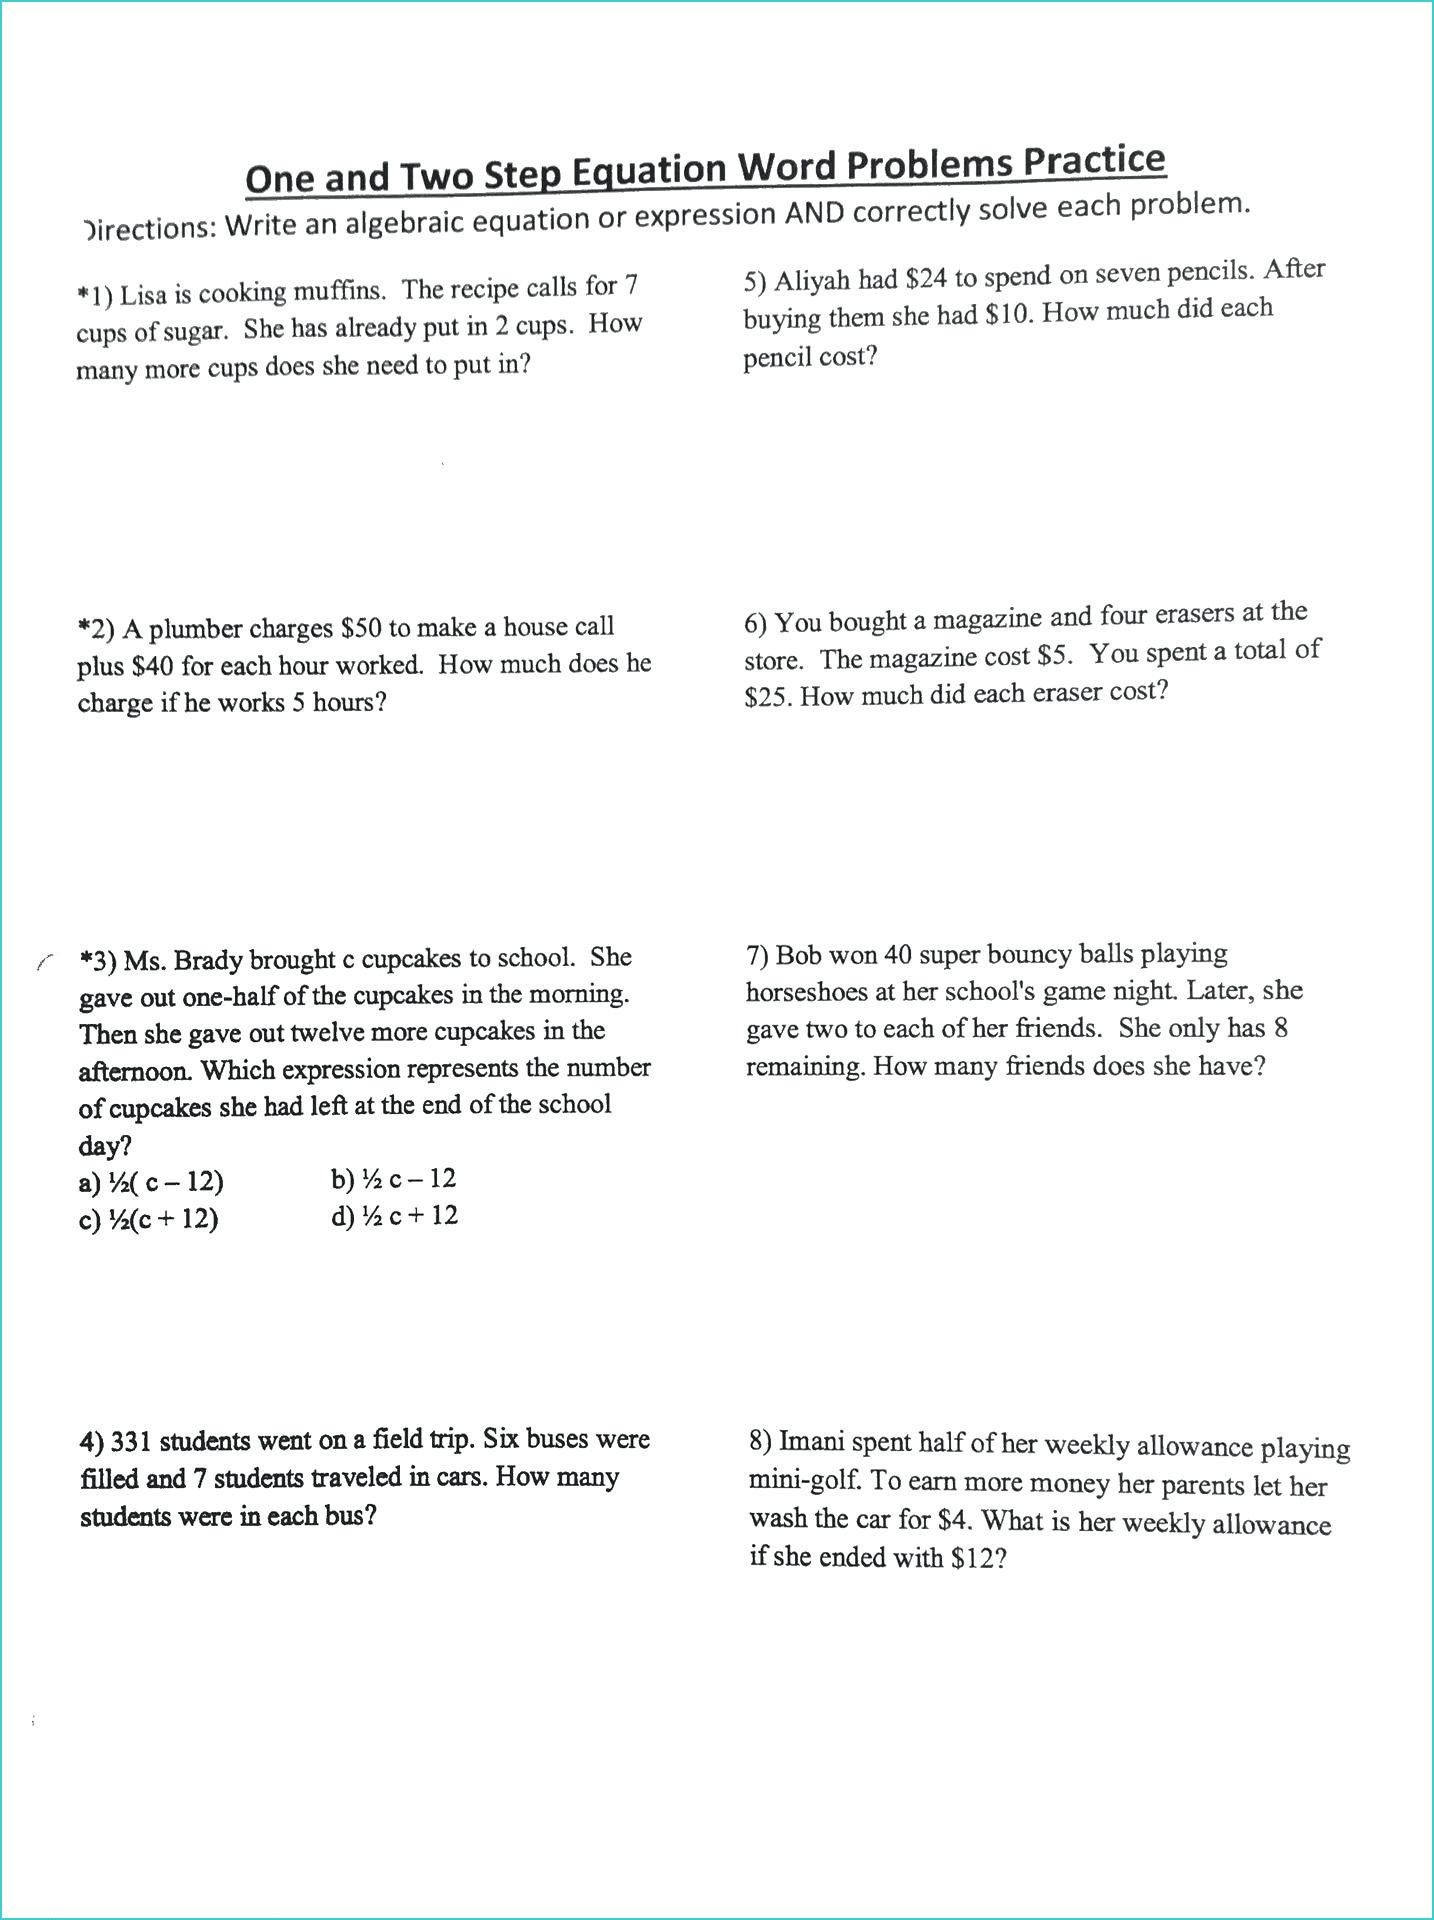 Two Step Word Problems Worksheet Adding and Subtracting Integers Word Problems Worksheet